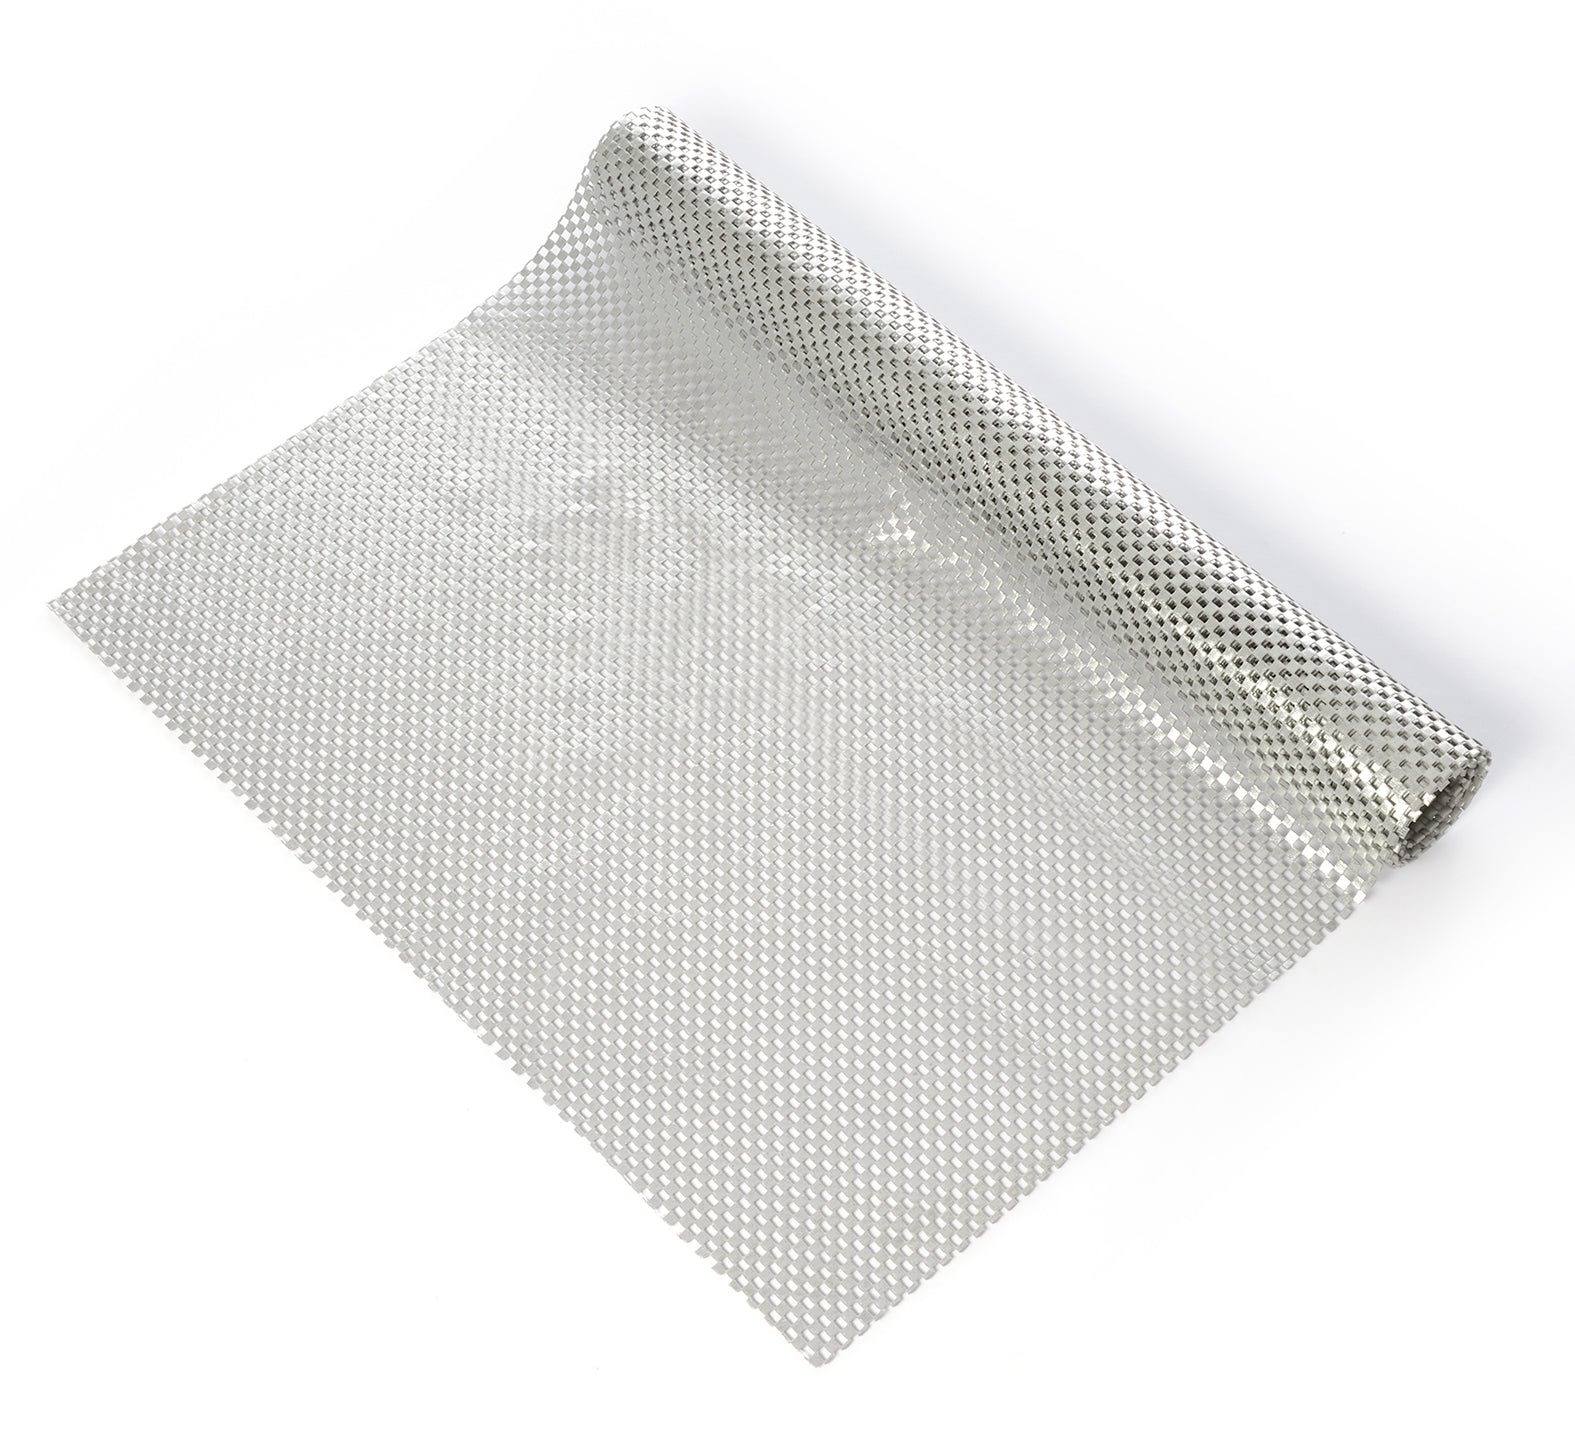 Con-tact Brand Grip Excel Grip Non-adhesive Shelf Liner- White (12